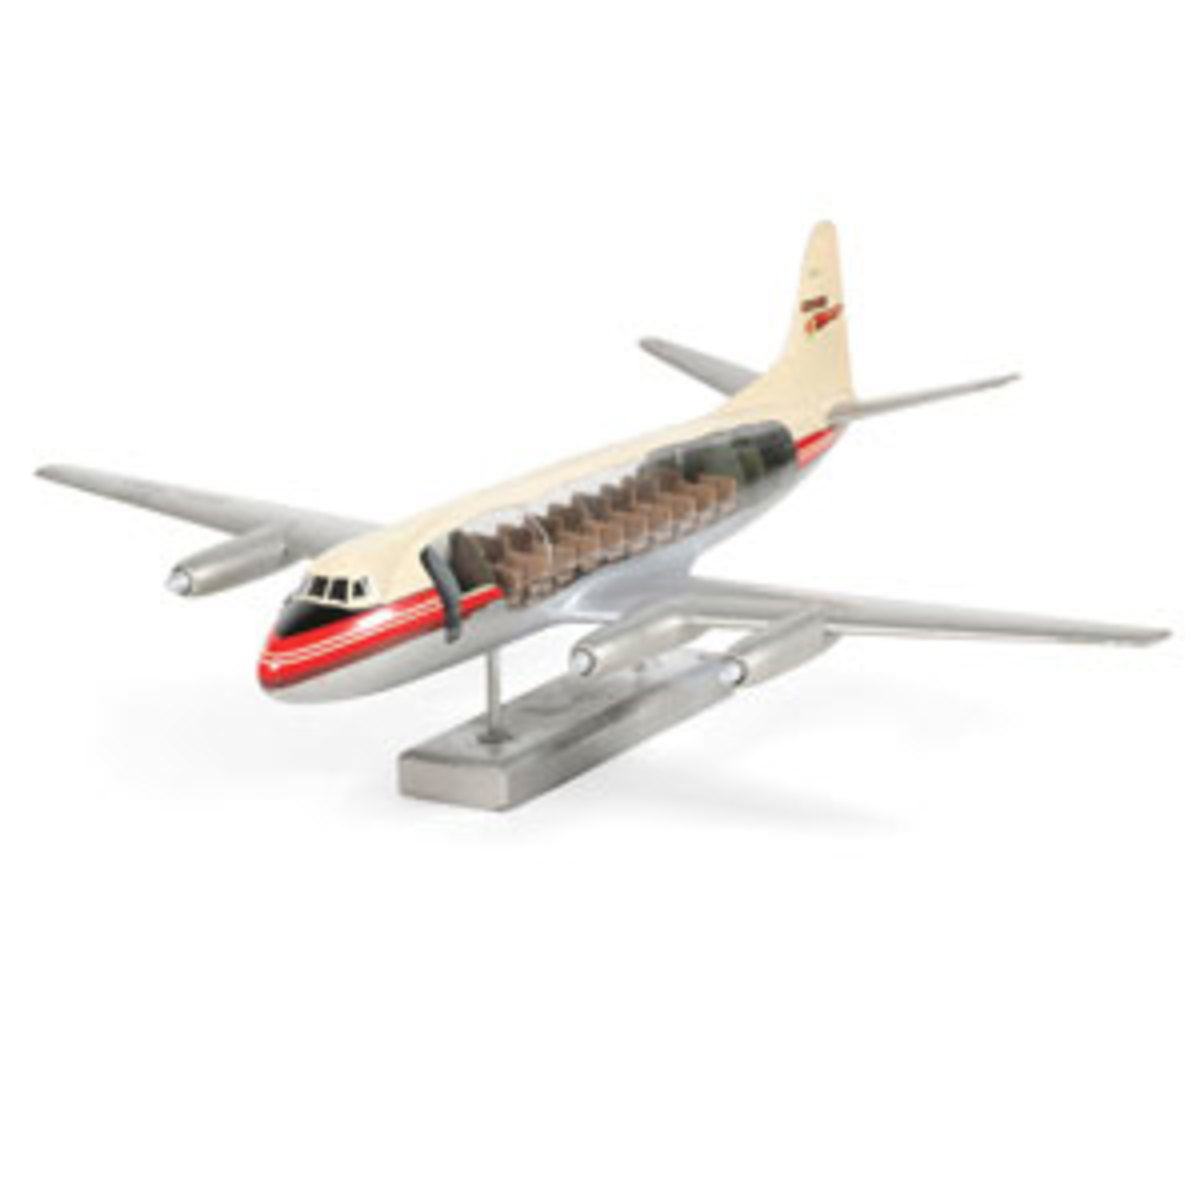  Large-scale Trans-Canada Viscount cutaway model airplane, 1:24 scale, featuring transparent acrylic body, 47” l, $9,000.